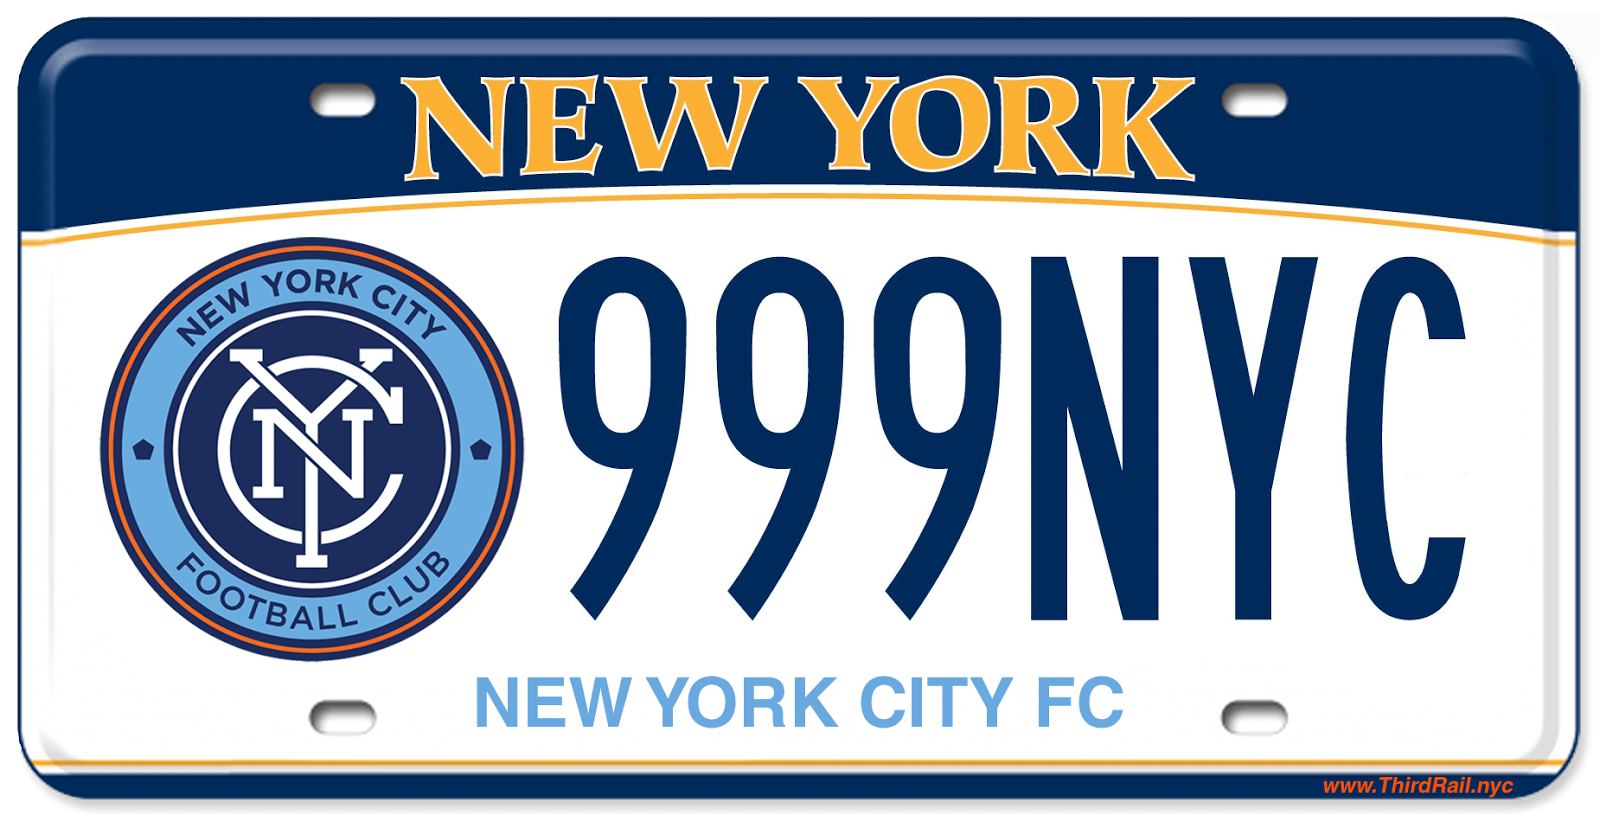 The Third Rail Our New Campaign Custom NYCFC License Plates!